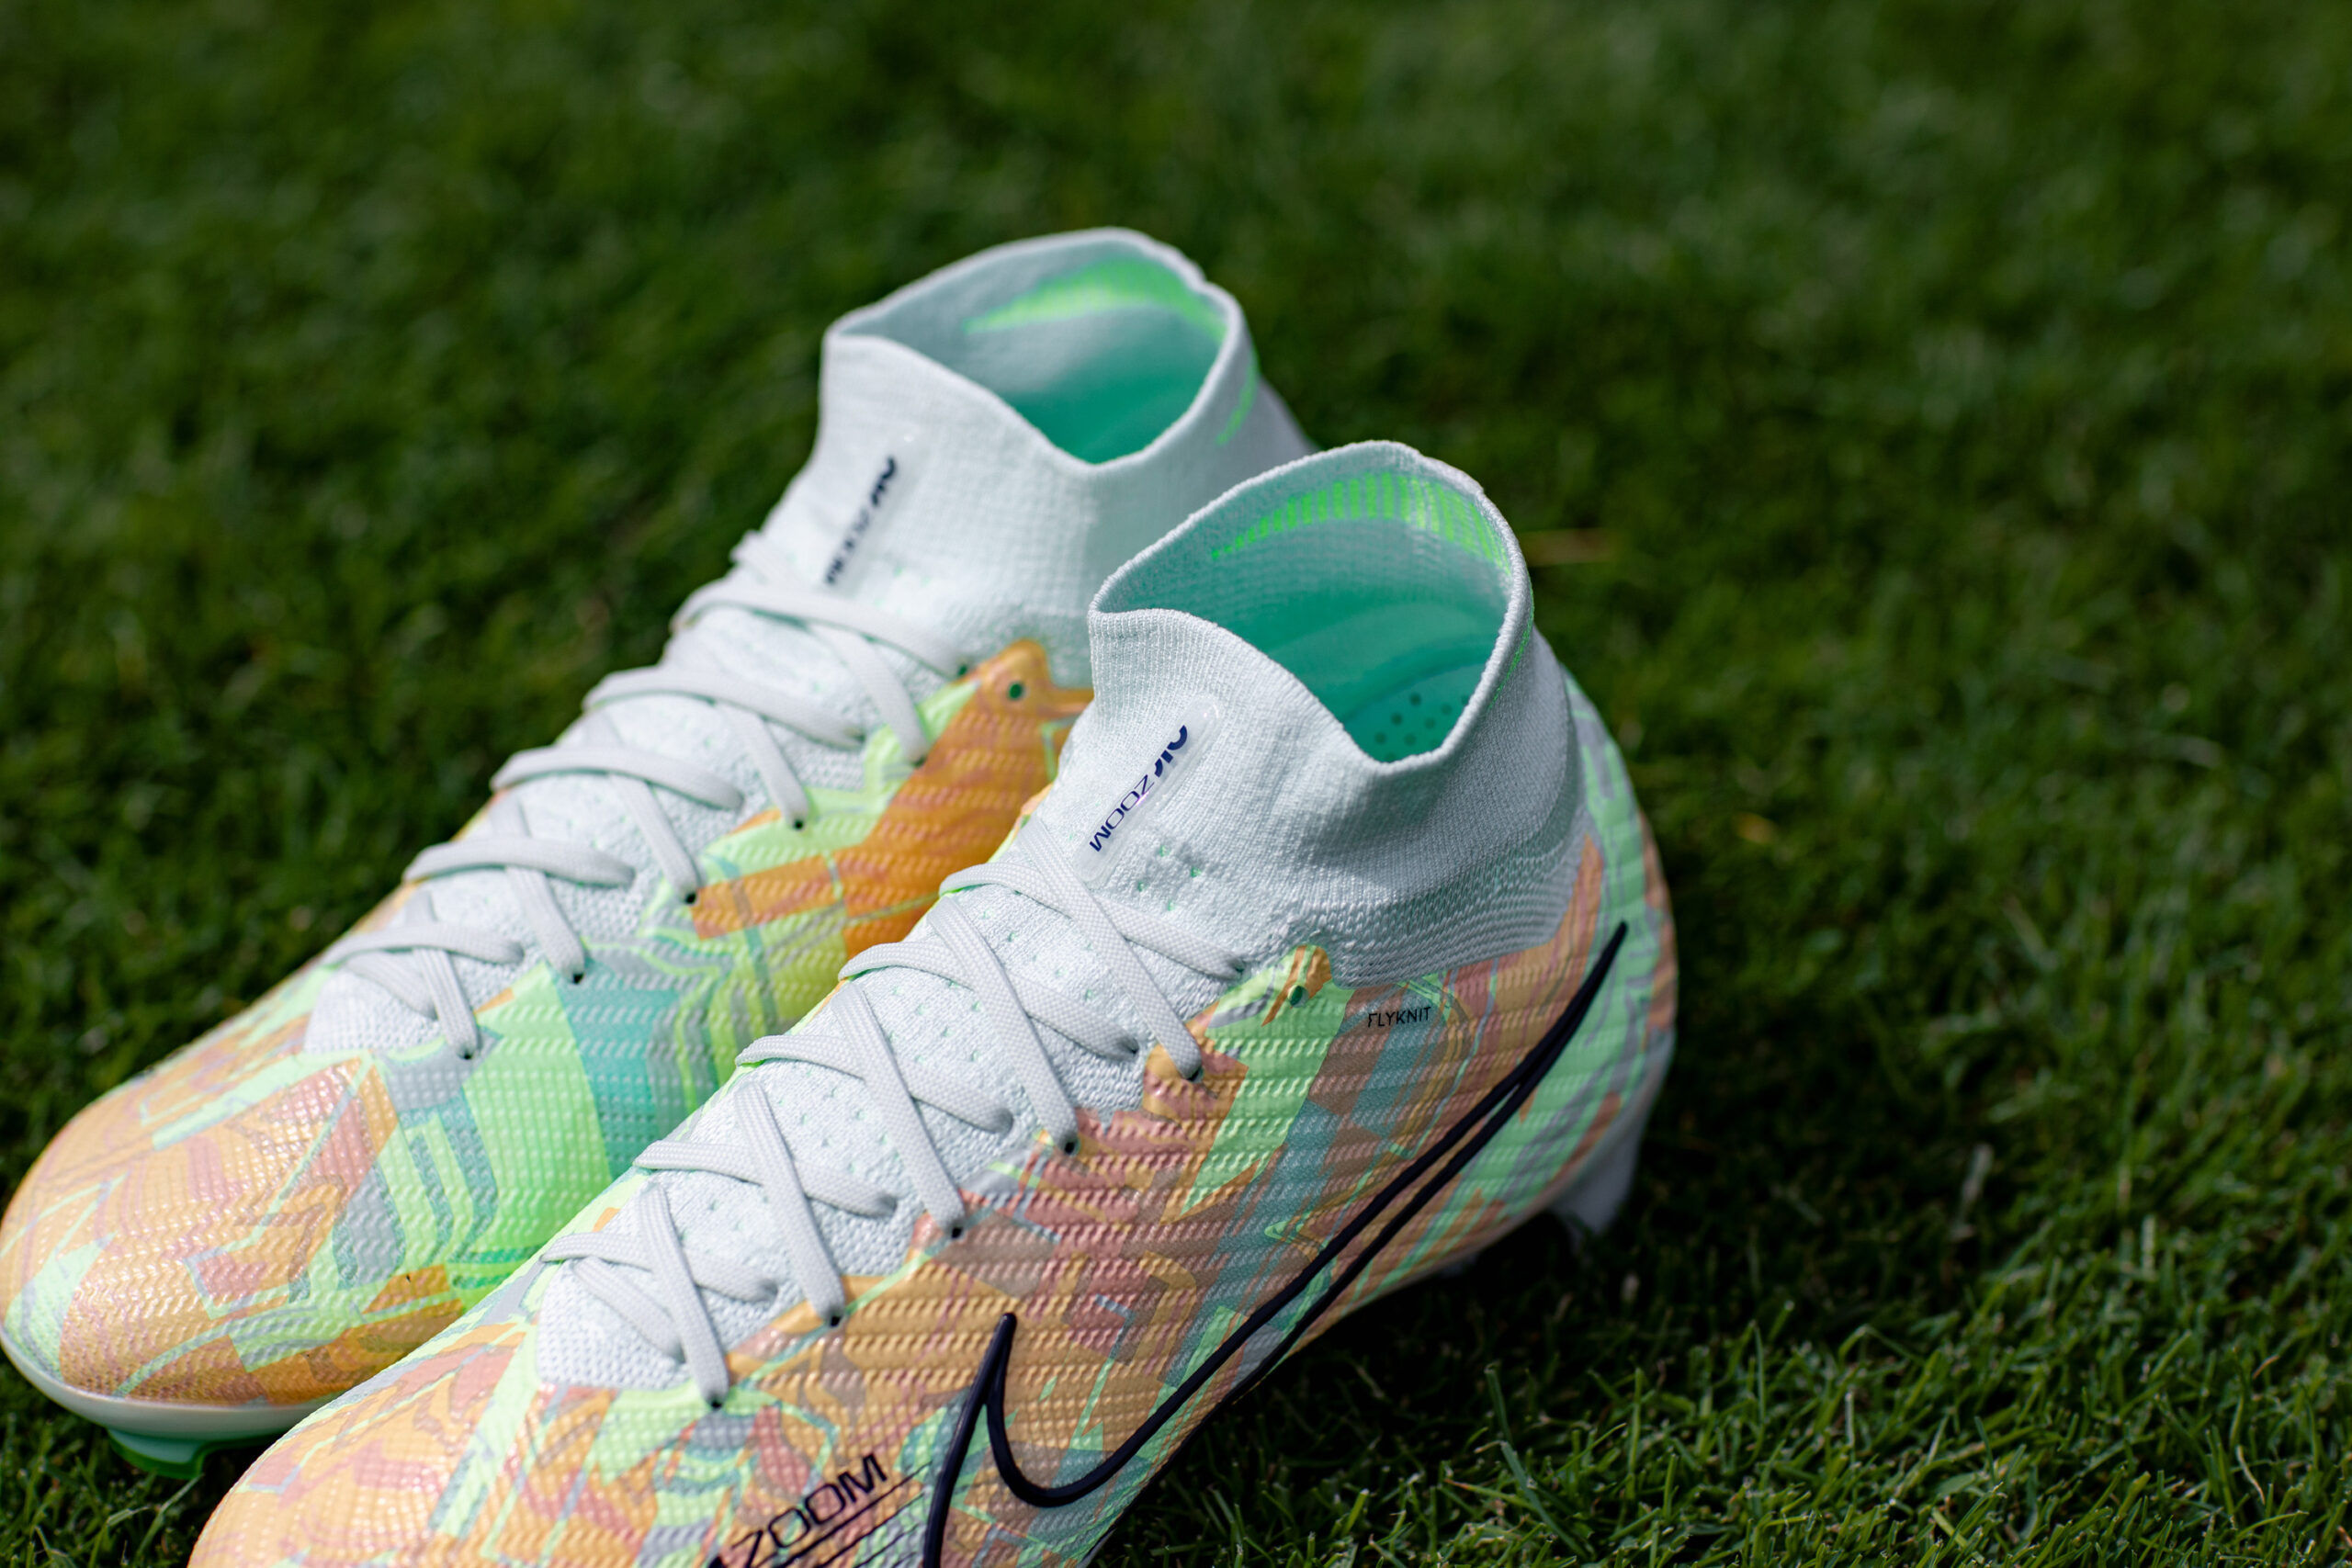 Nike Unveils The Bonded Pack - The Circle - A SoccerPro Soccer Fan Blog